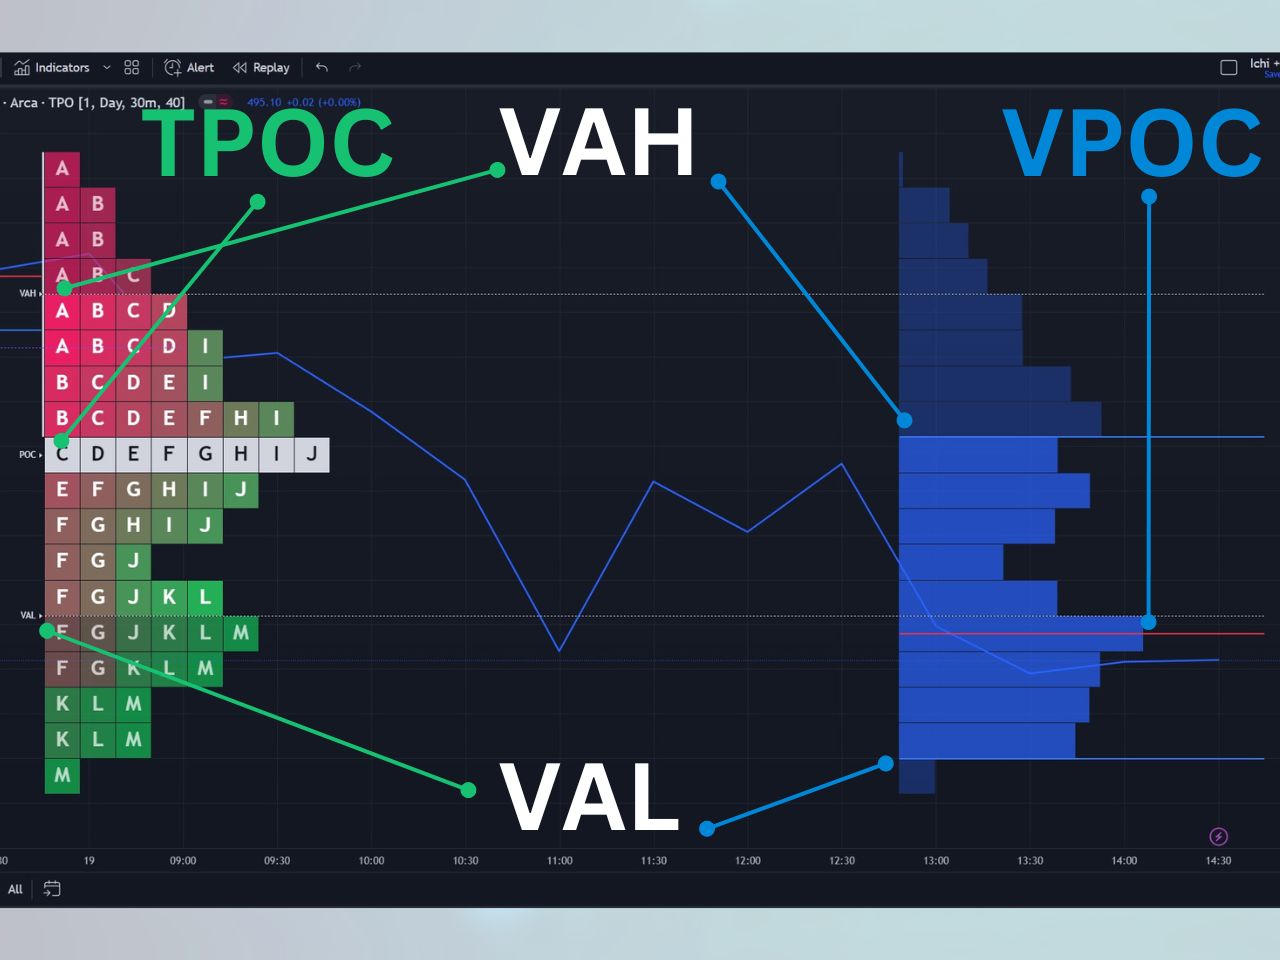 imag showing VAH, VAL, VPOC, and TPOC